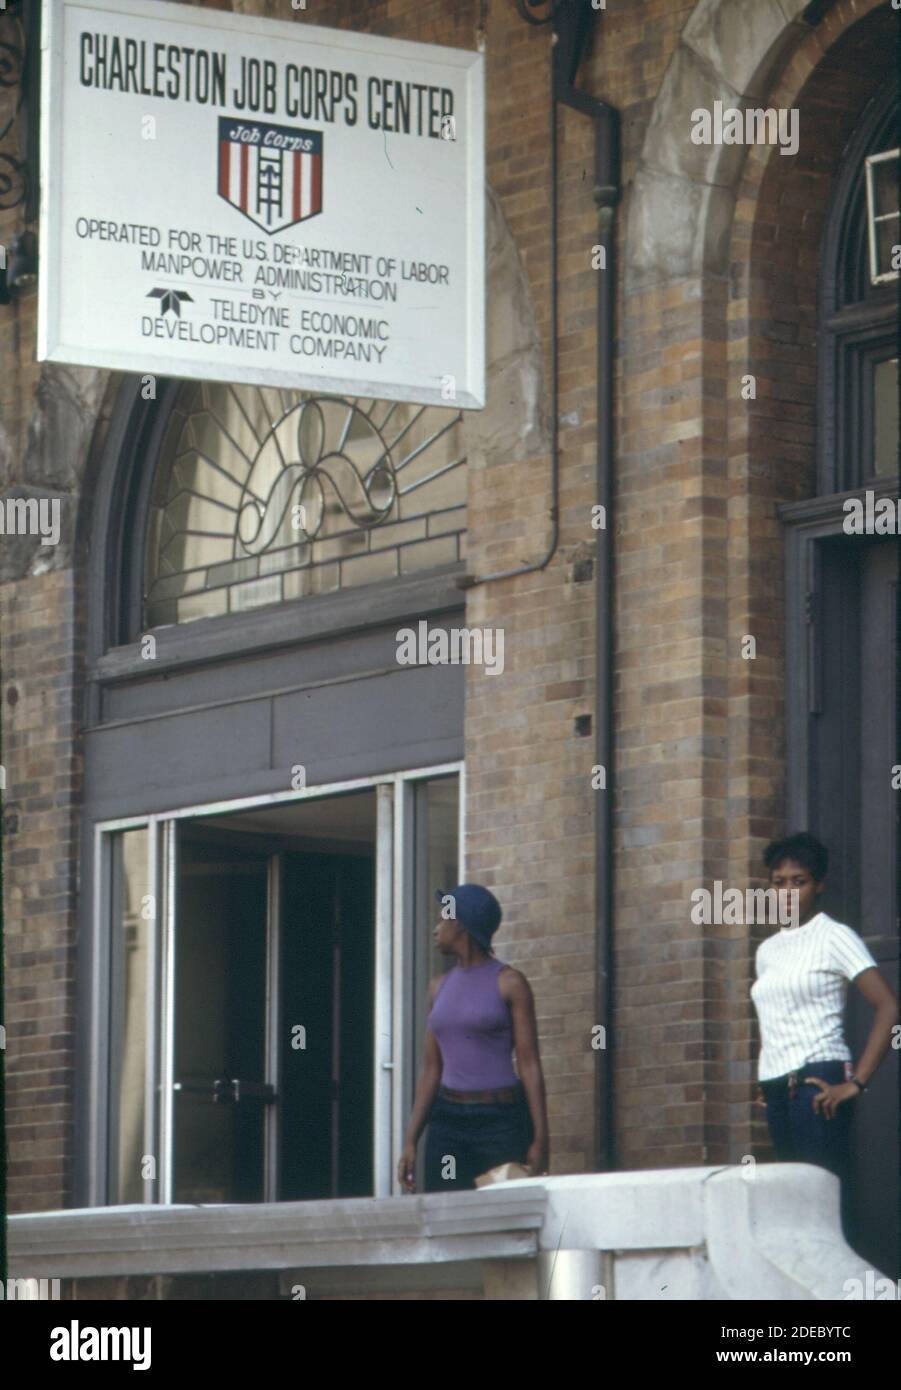 1970s Photo (1973) -  Outside the job corps center on Summers Street in downtown Charleston West Virginia Stock Photo